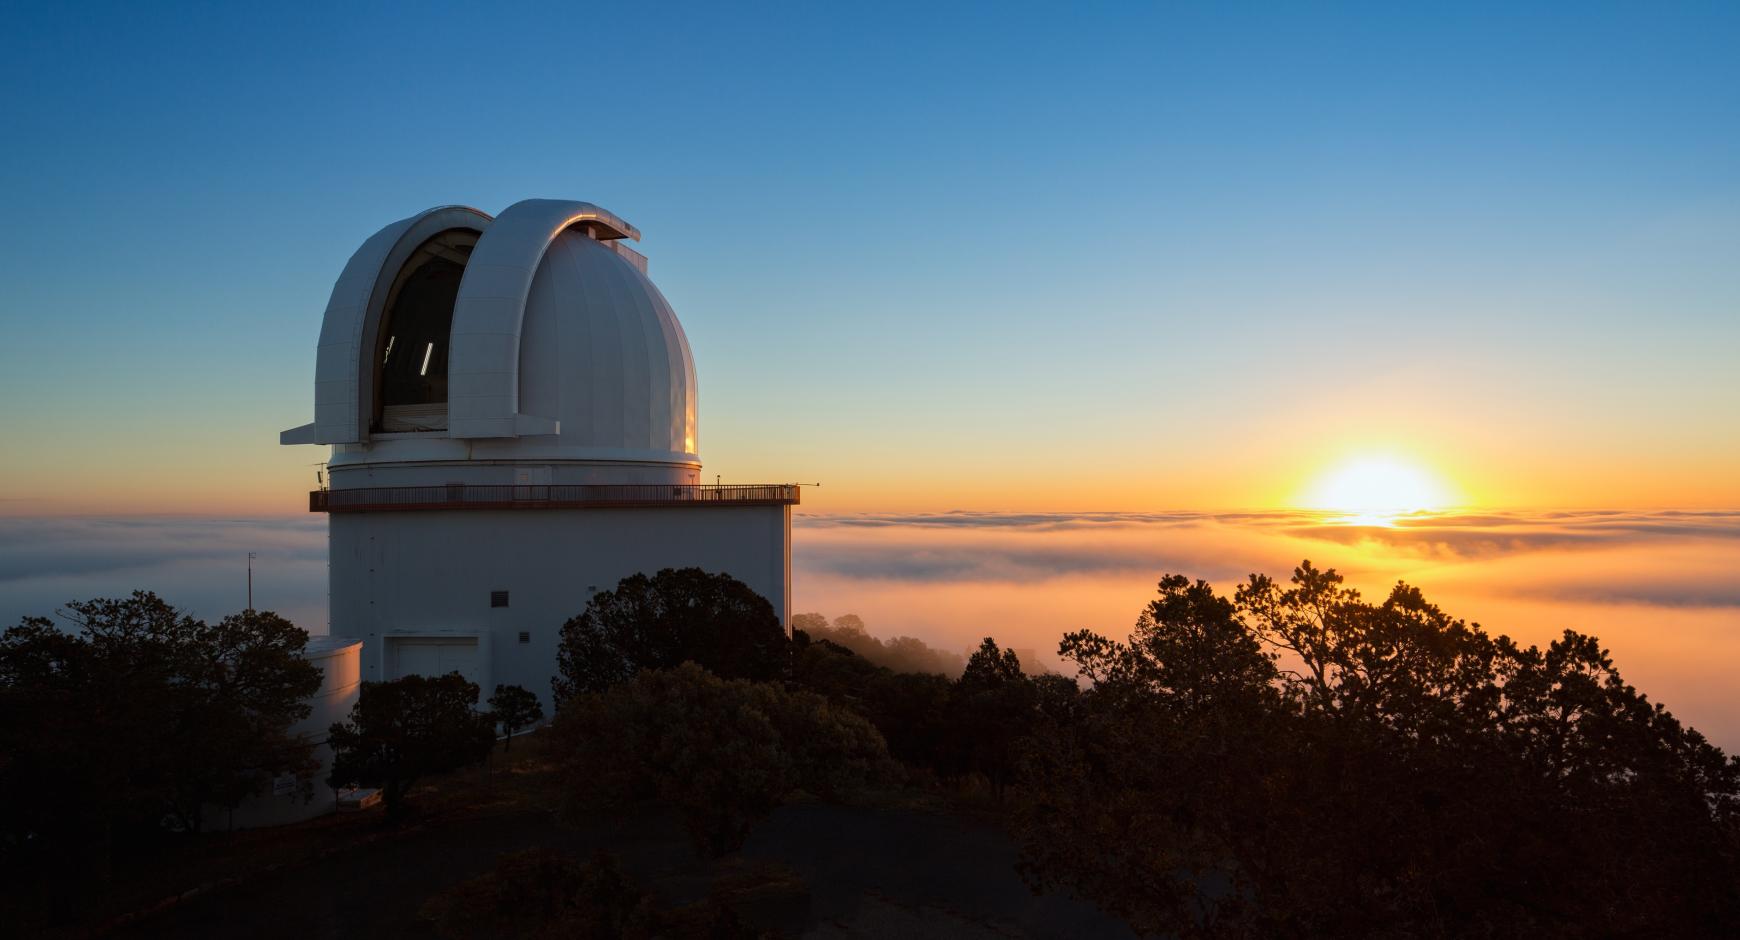 The Sun rises behind the open dome of the Harlan J. Smith Telescope